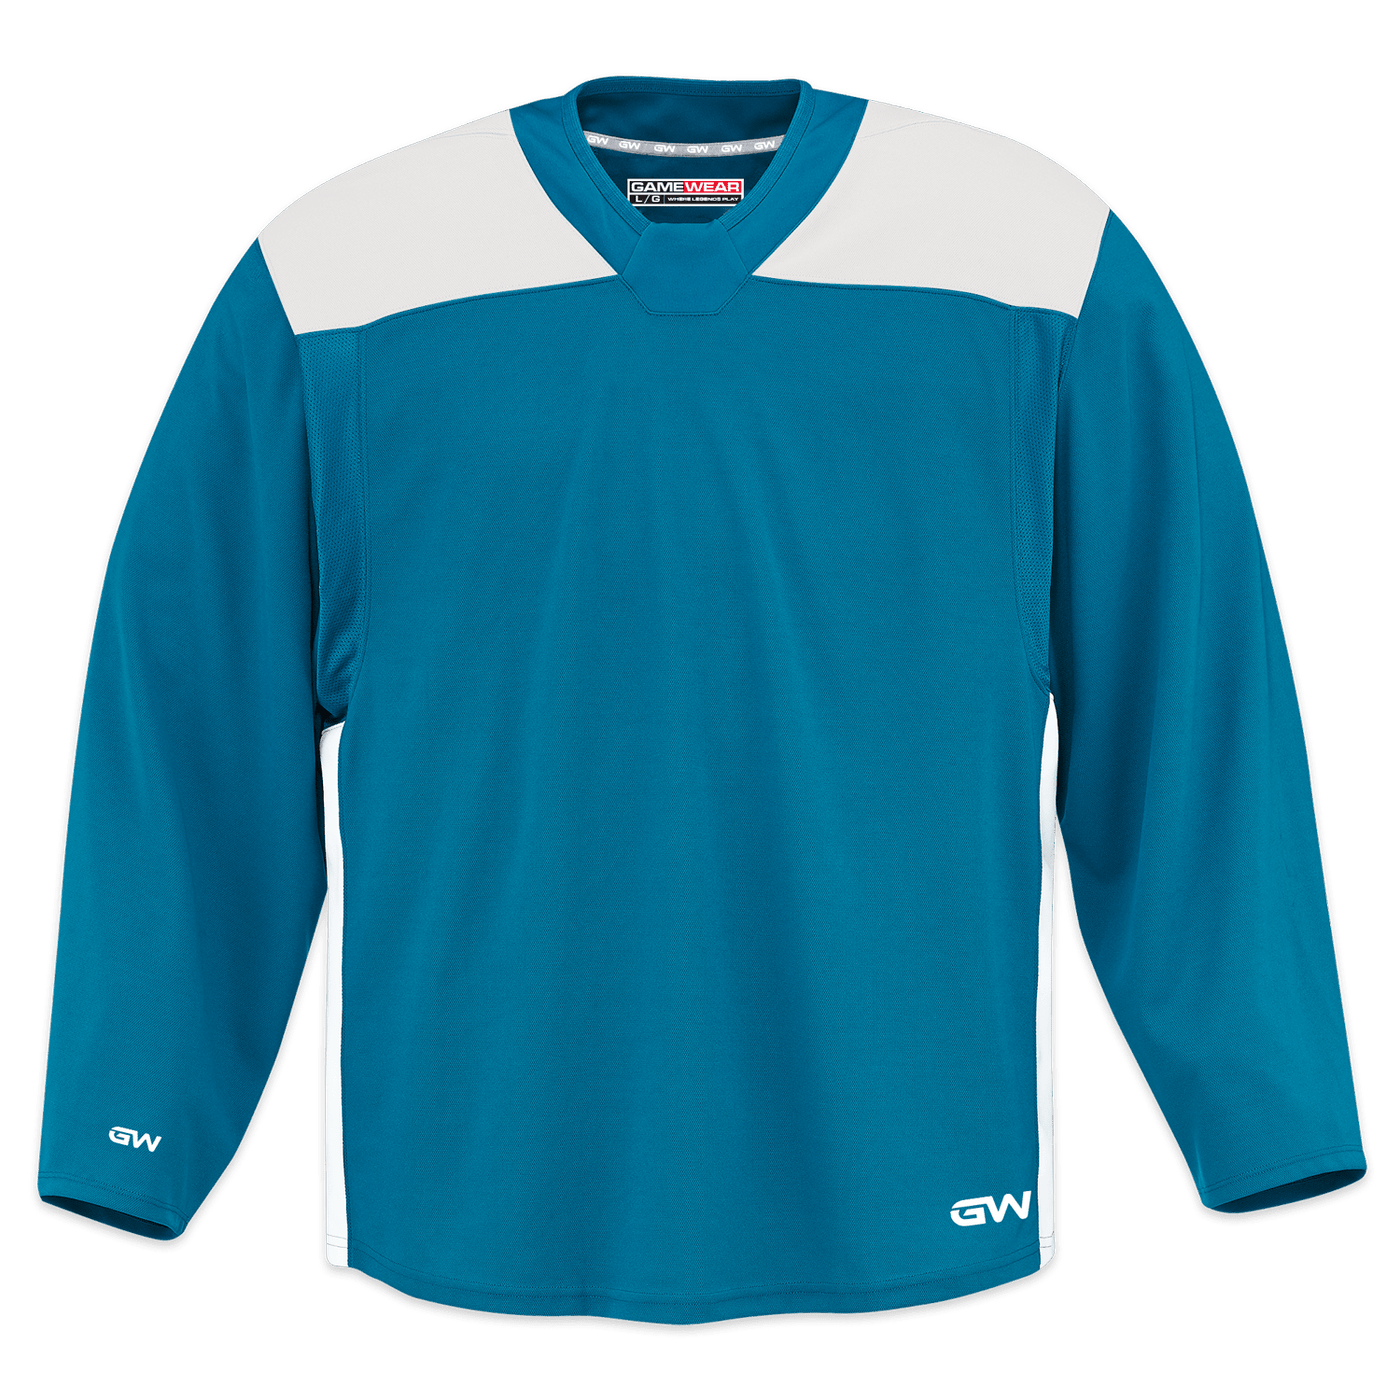 GameWear GW6500 ProLite Series Junior Hockey Practice Jersey - Turquoise / White - The Hockey Shop Source For Sports